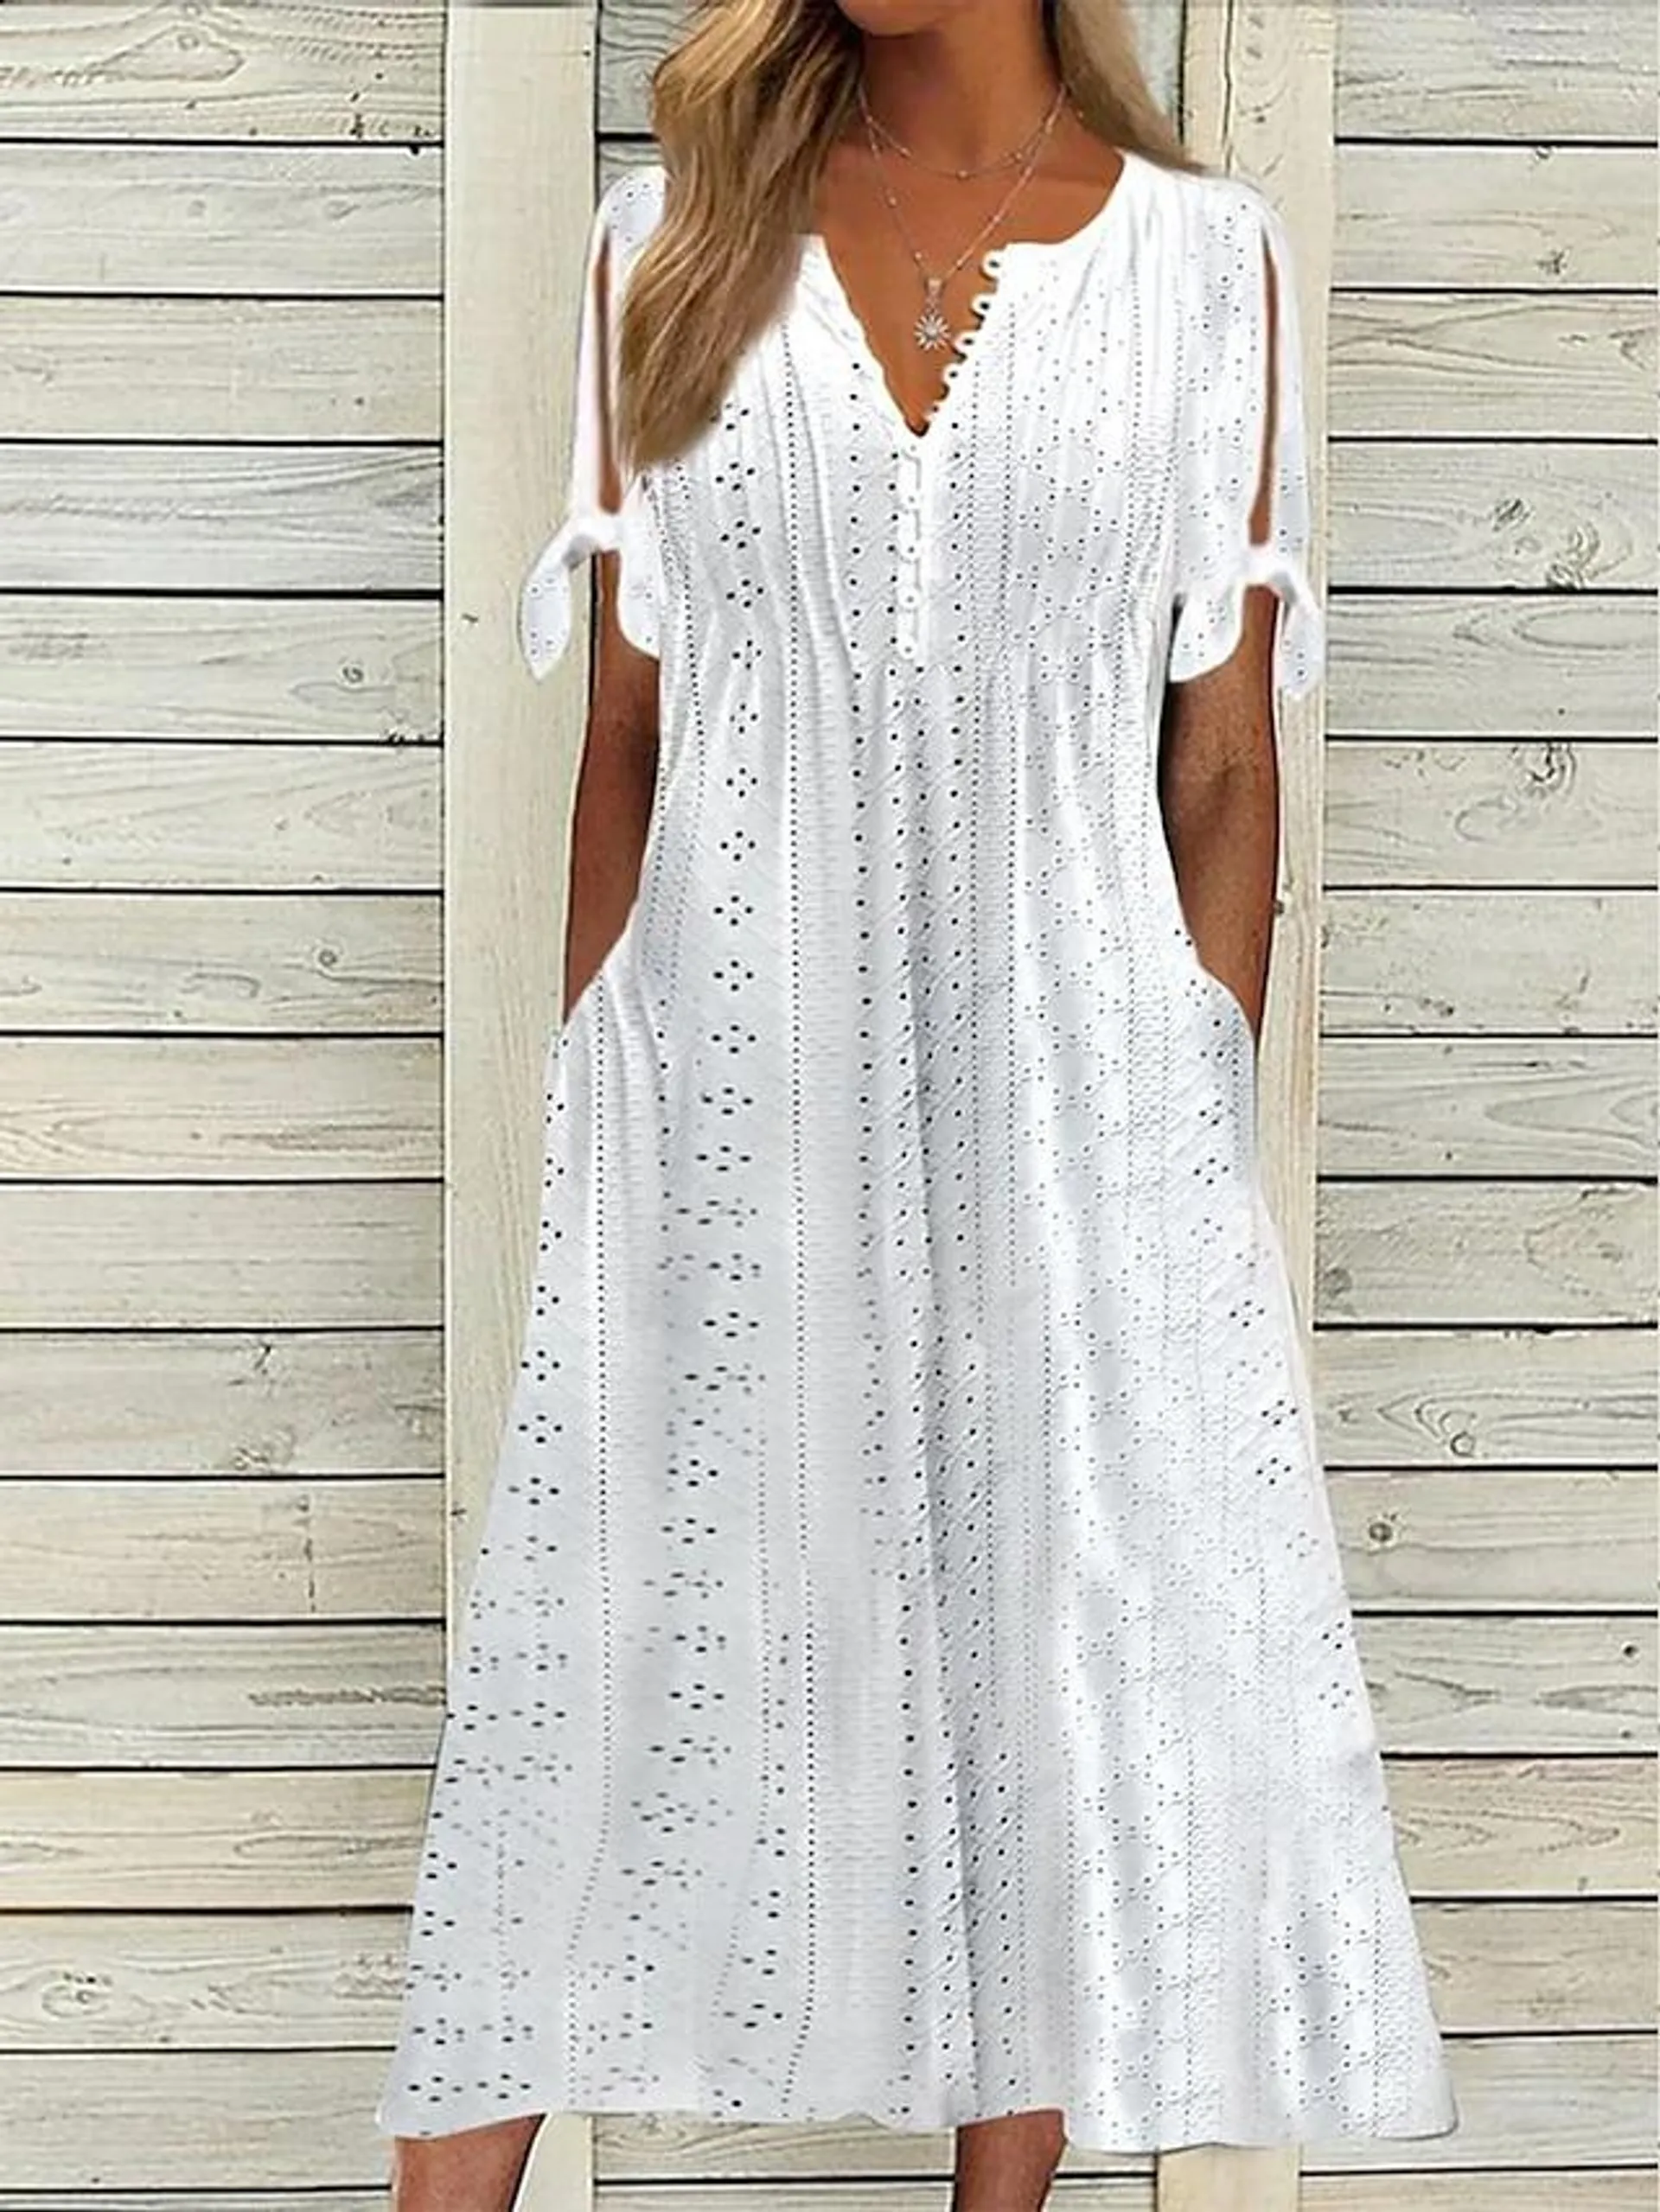 Women's Casual Dress Summer Dress Pleated Dress Plain Lace Ruched V Neck Midi Dress Fashion Elegant Outdoor Daily Short Sleeve Loose Fit White Blue Green Summer Spring S M L XL XXL